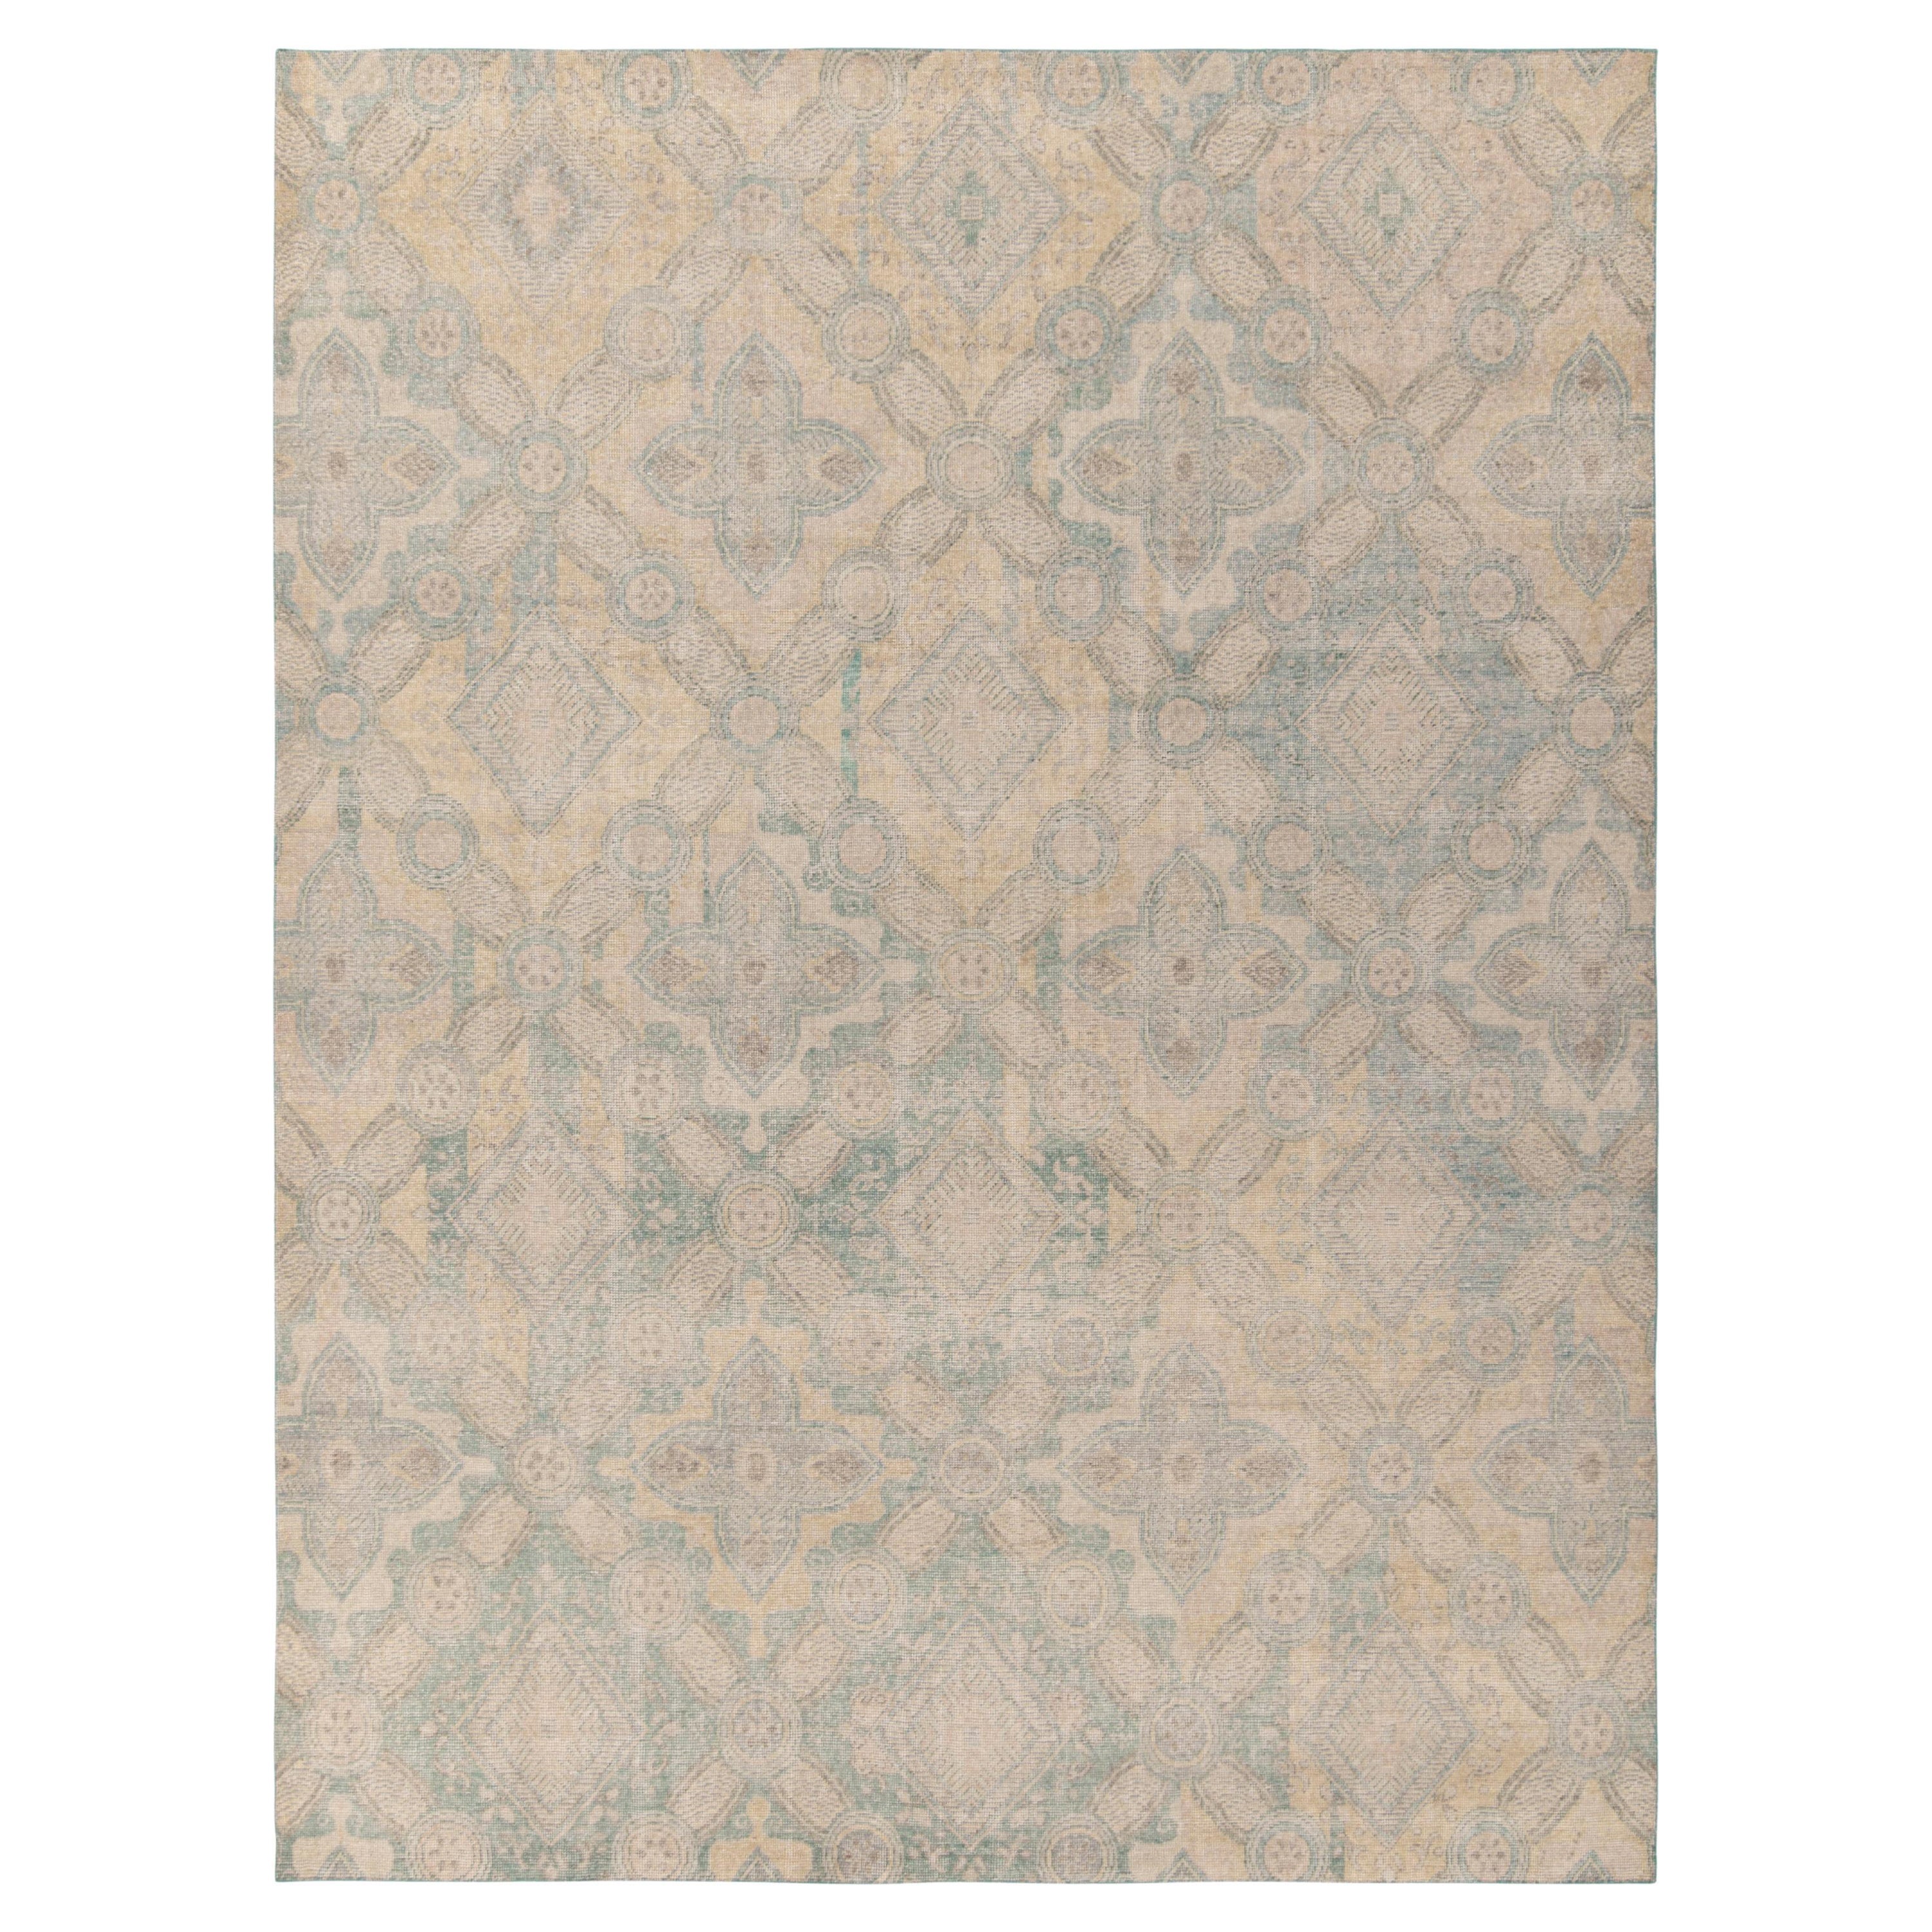 Rug & Kilim's Distressed Transitional Deco Style Rug, Cream, Blue Floral For Sale